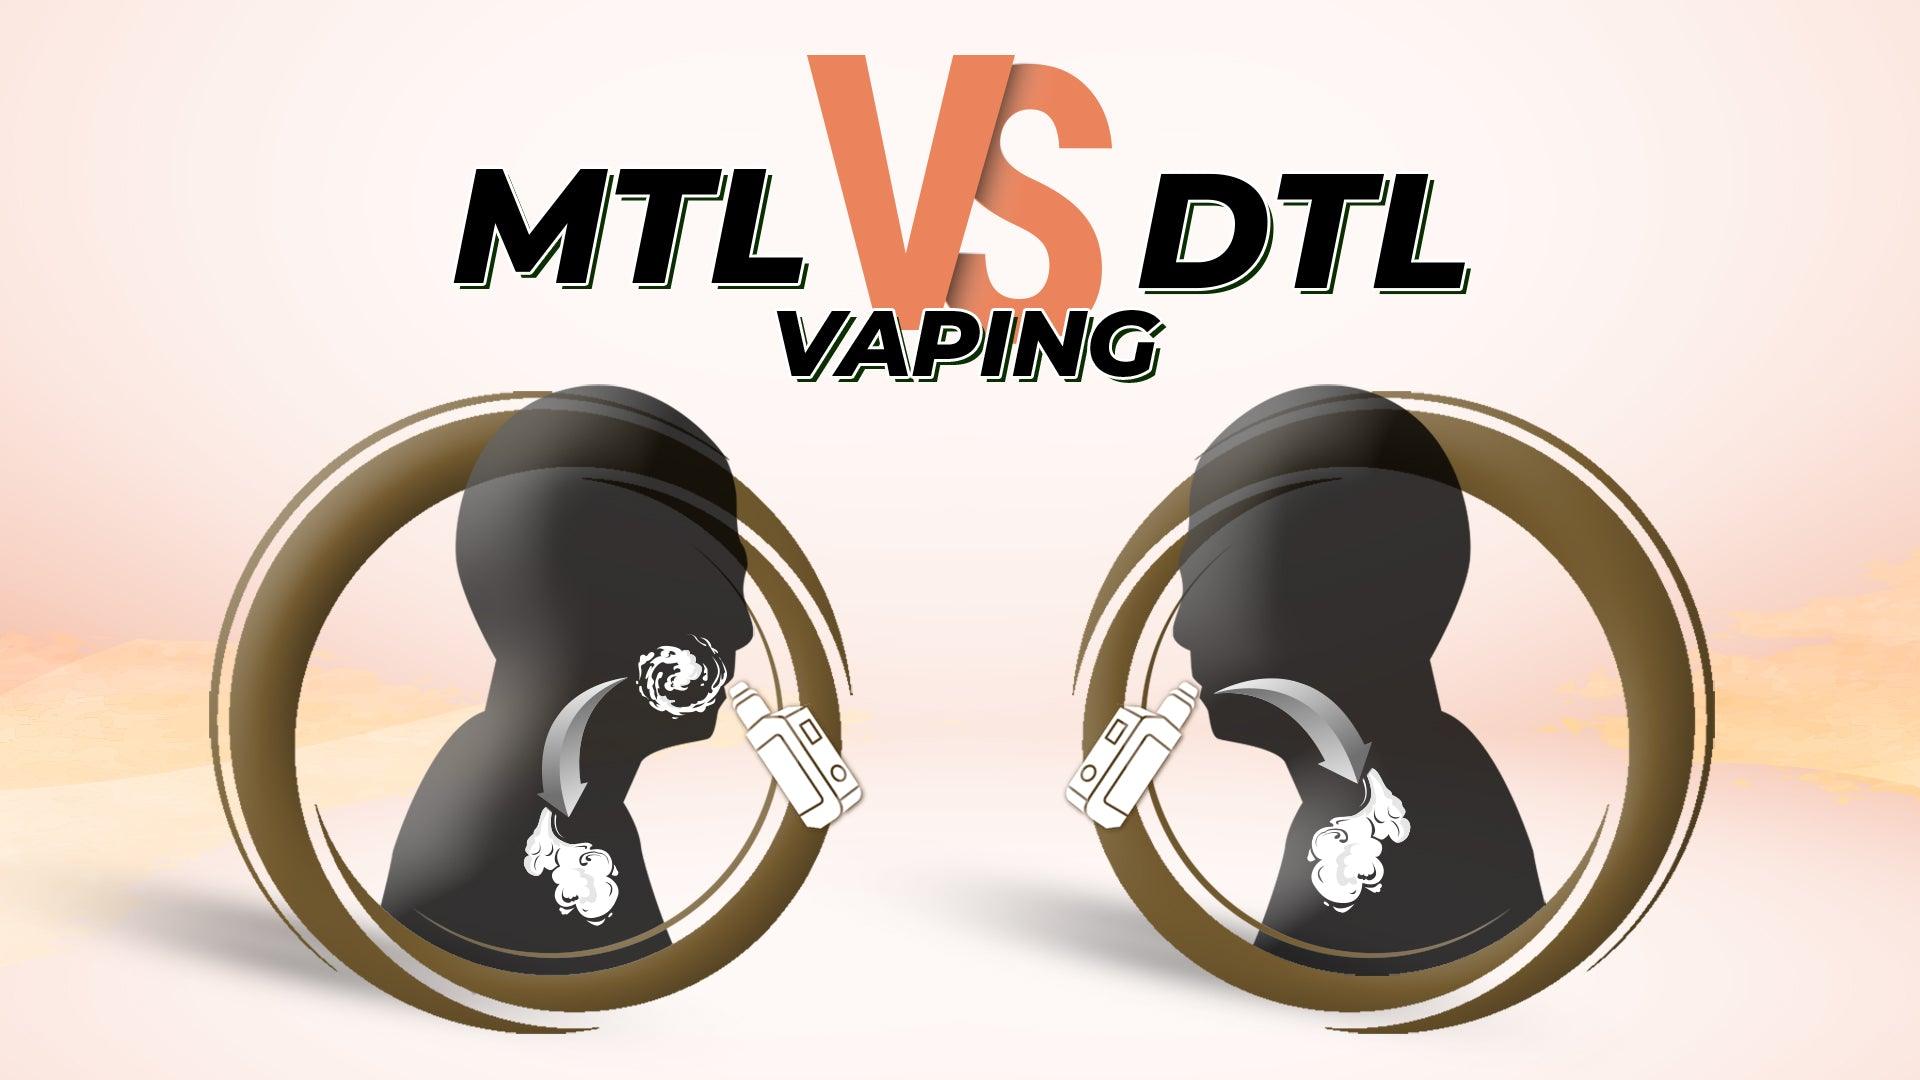 What’s the difference between MTL and DTL vaping?